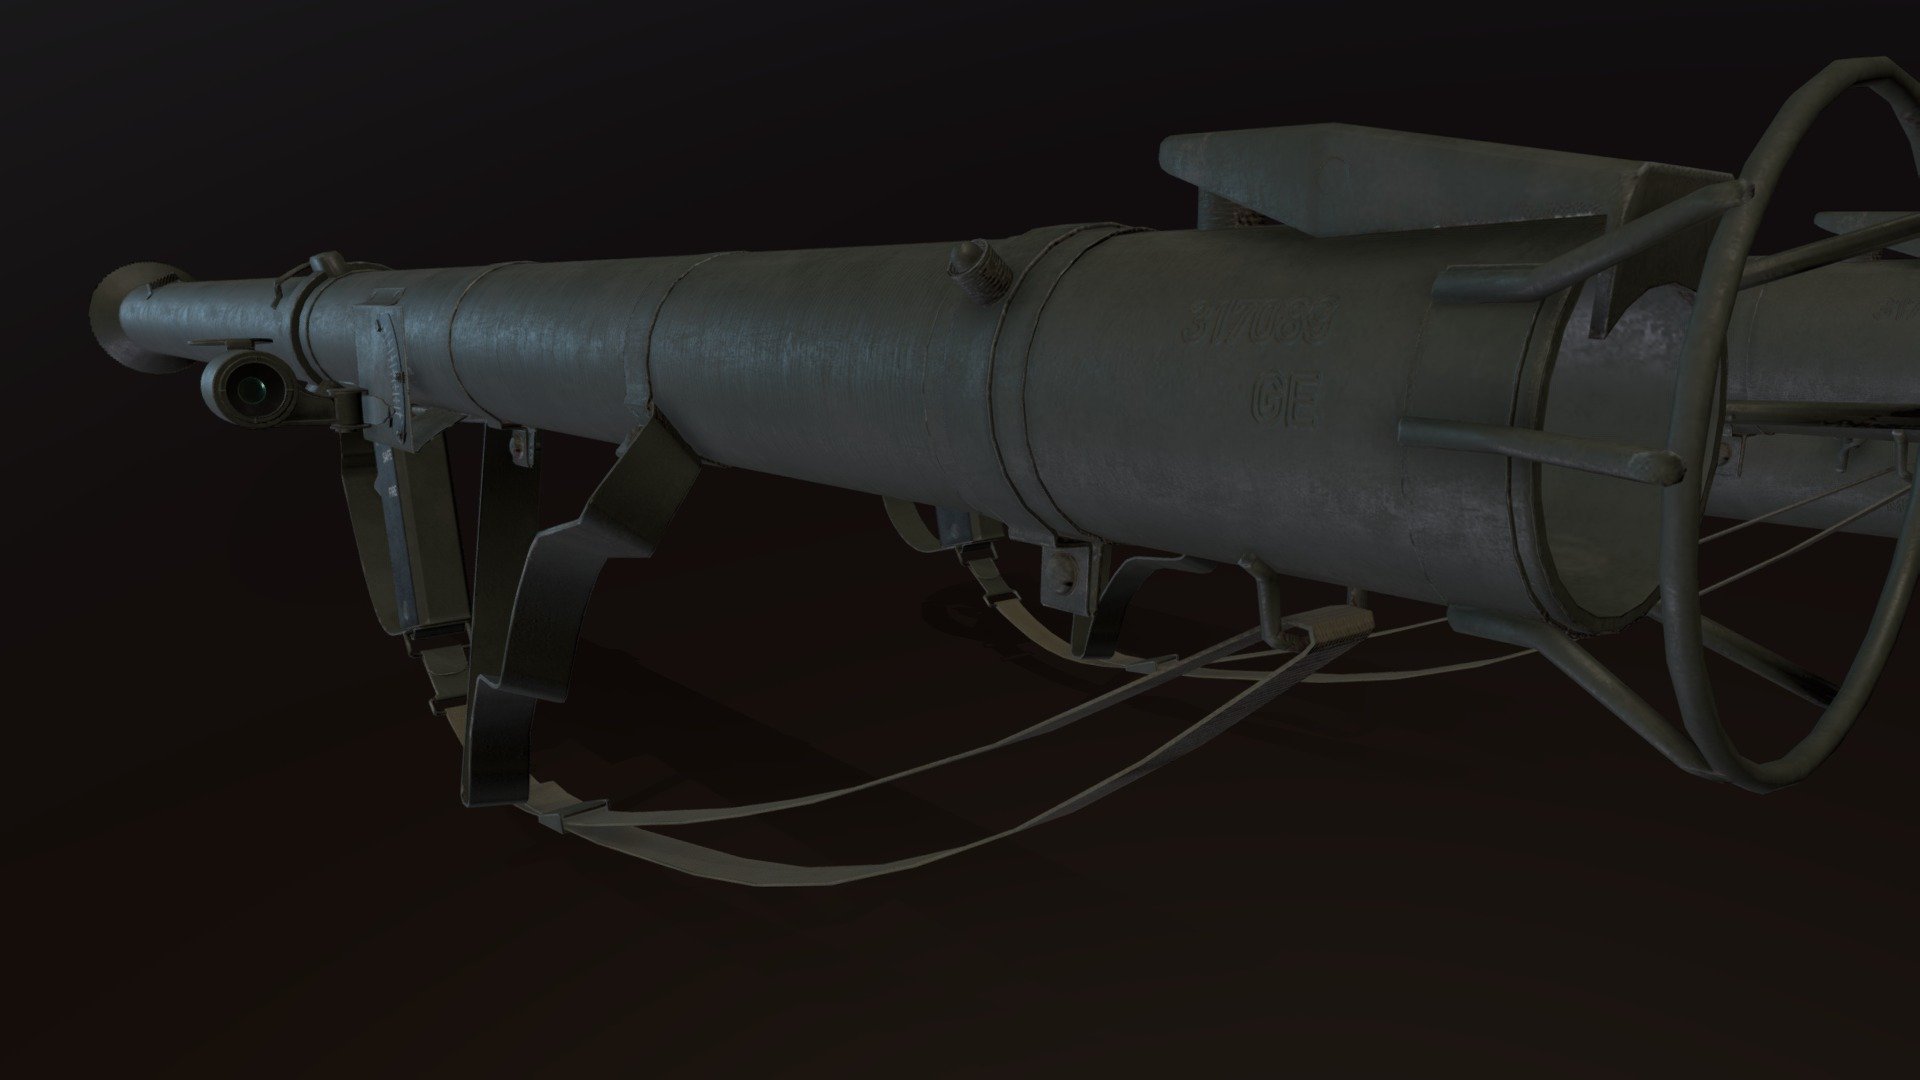 M9 or M9A1 &lsquo;bazooka' launcher;  arrives in theater in the later half  of 1944 to replace  the obsolete M1/M1A1 launchers.

The original M9 bazooka comes with a rather crude iron sight;  which was then replaced by the telescopic sight. however, wartime pictures from 1944-1945 did not seem tto suggest any use of the telescopic sight (or i happen to simply not find one!)

model comes with both tthe early ironsight and later telescopic sightt

modelled in blender, texured in substance painter 



 - Launcher M9 - Buy Royalty Free 3D model by simcardo 3d model